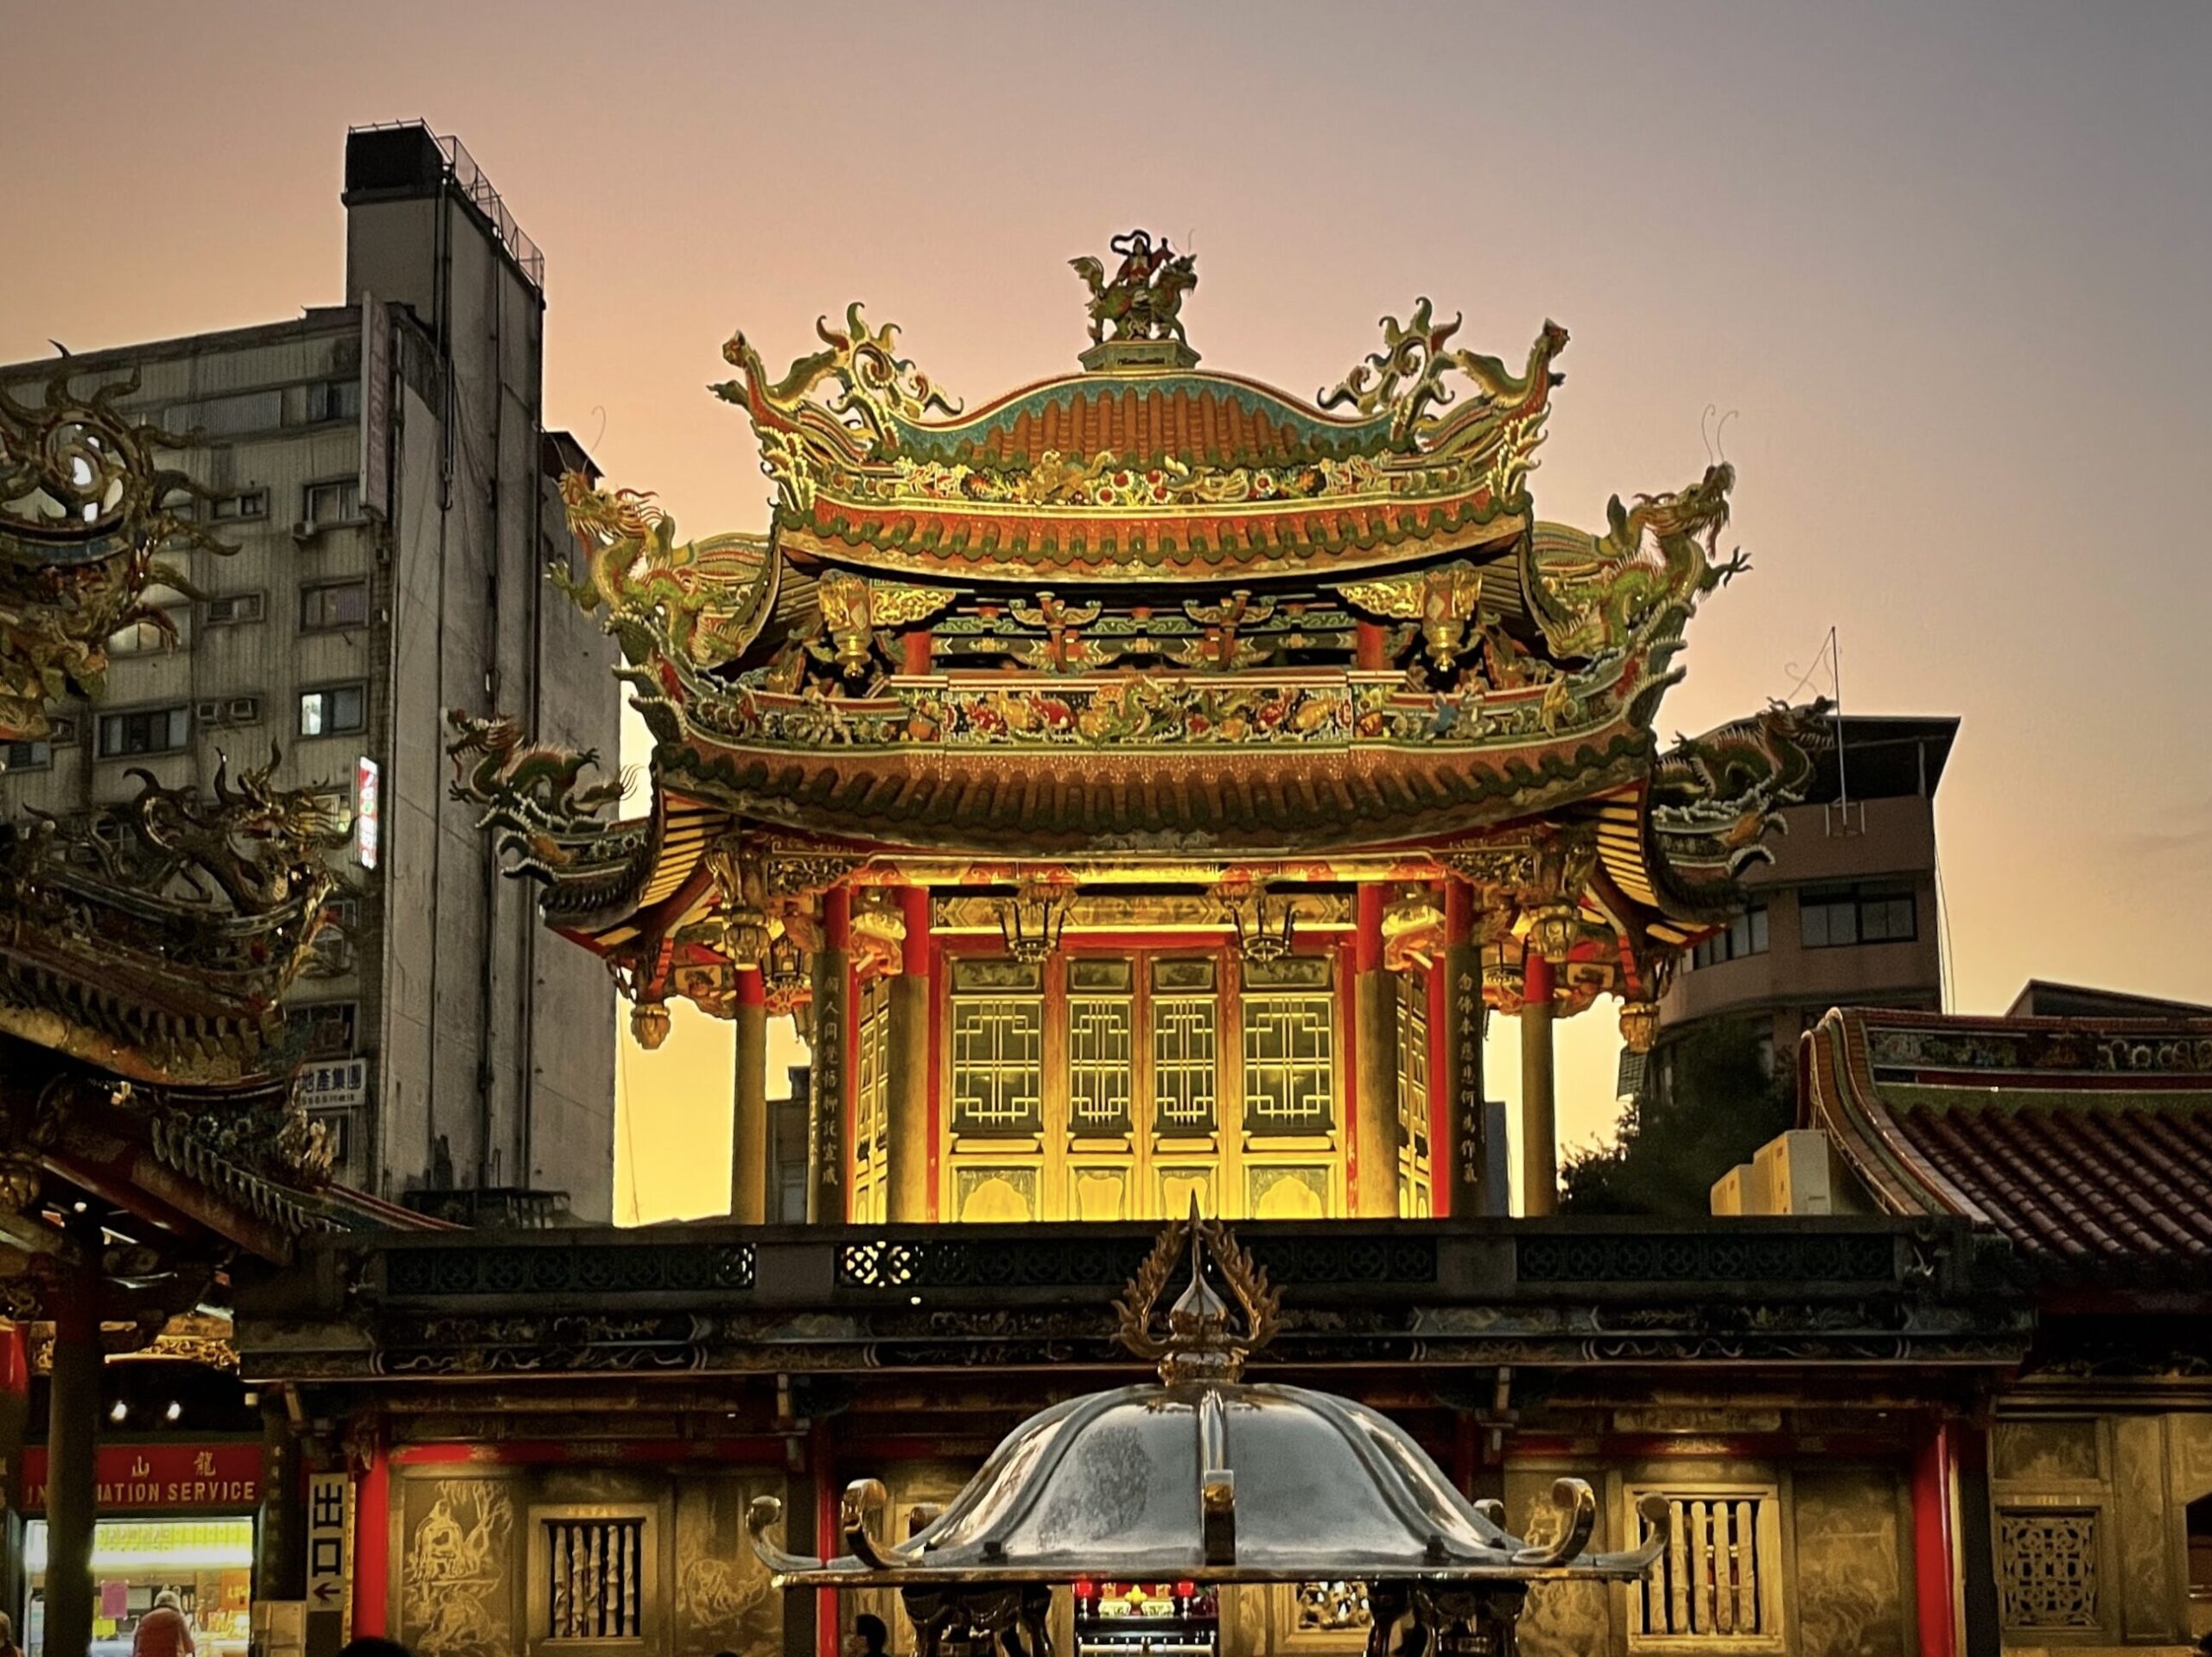 Image shows the vibrant Longshan Temple at sunset, highlighting the colors of gold and red.